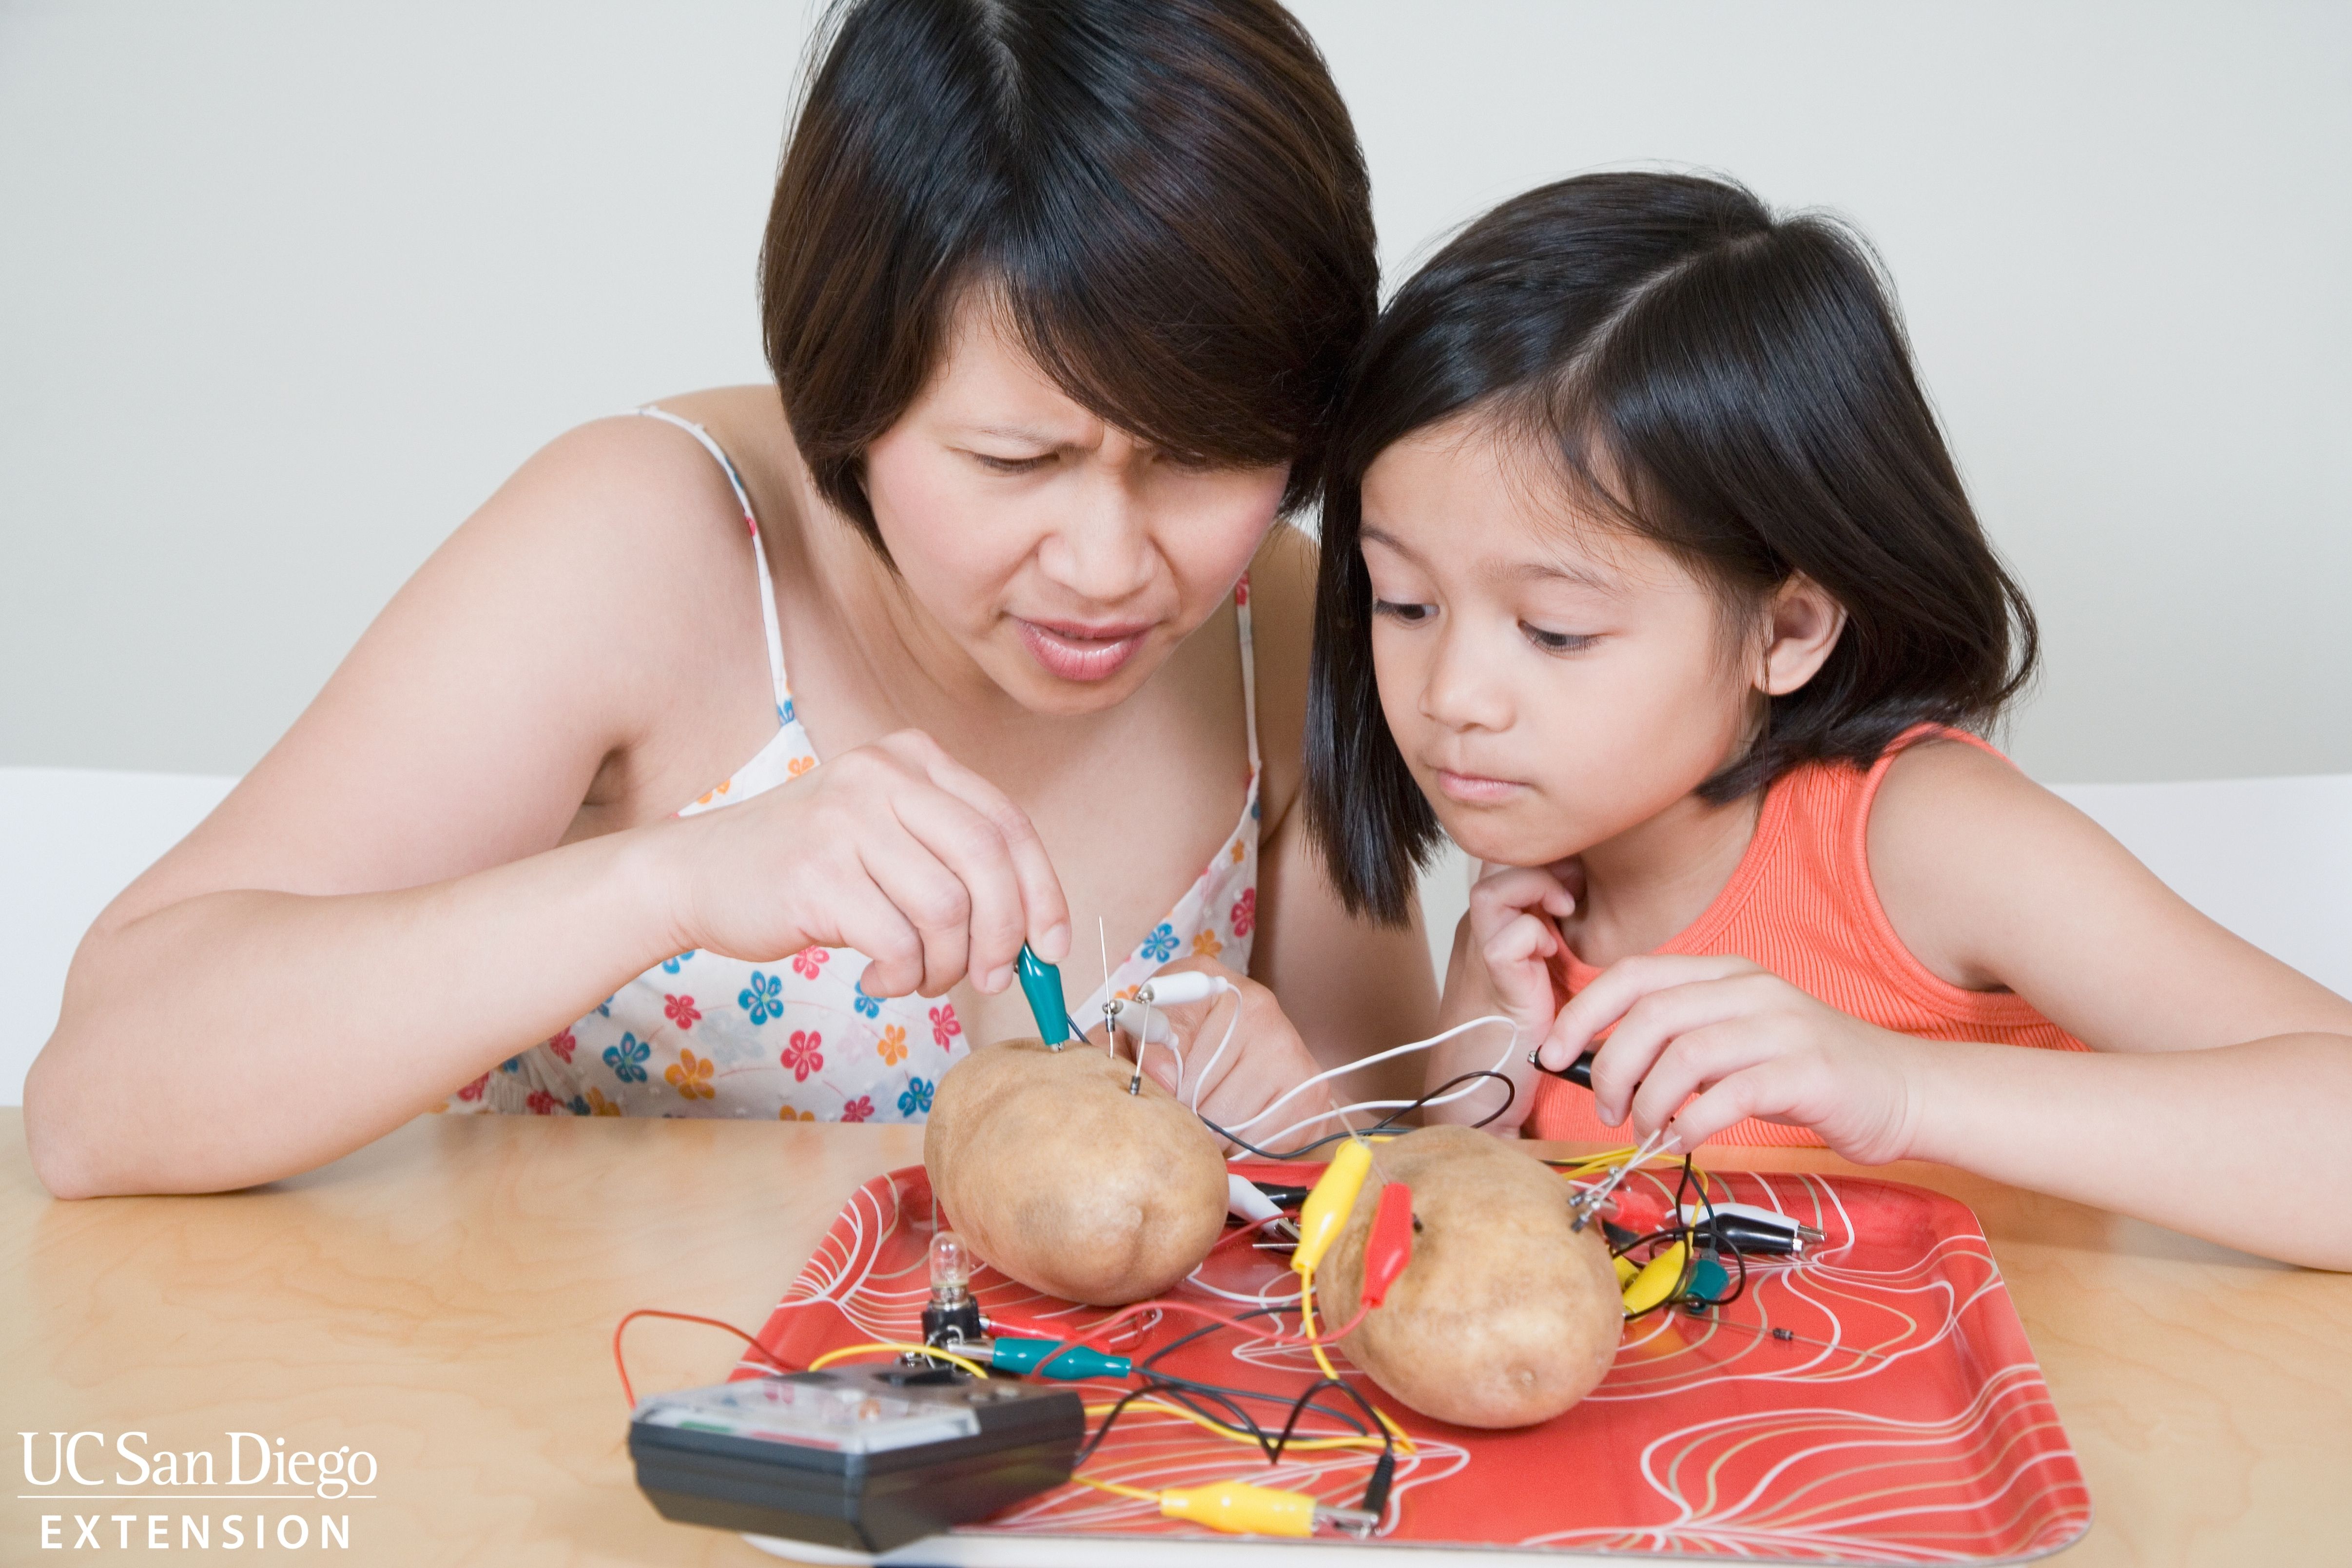 parent and child experimenting with wires and vegetables